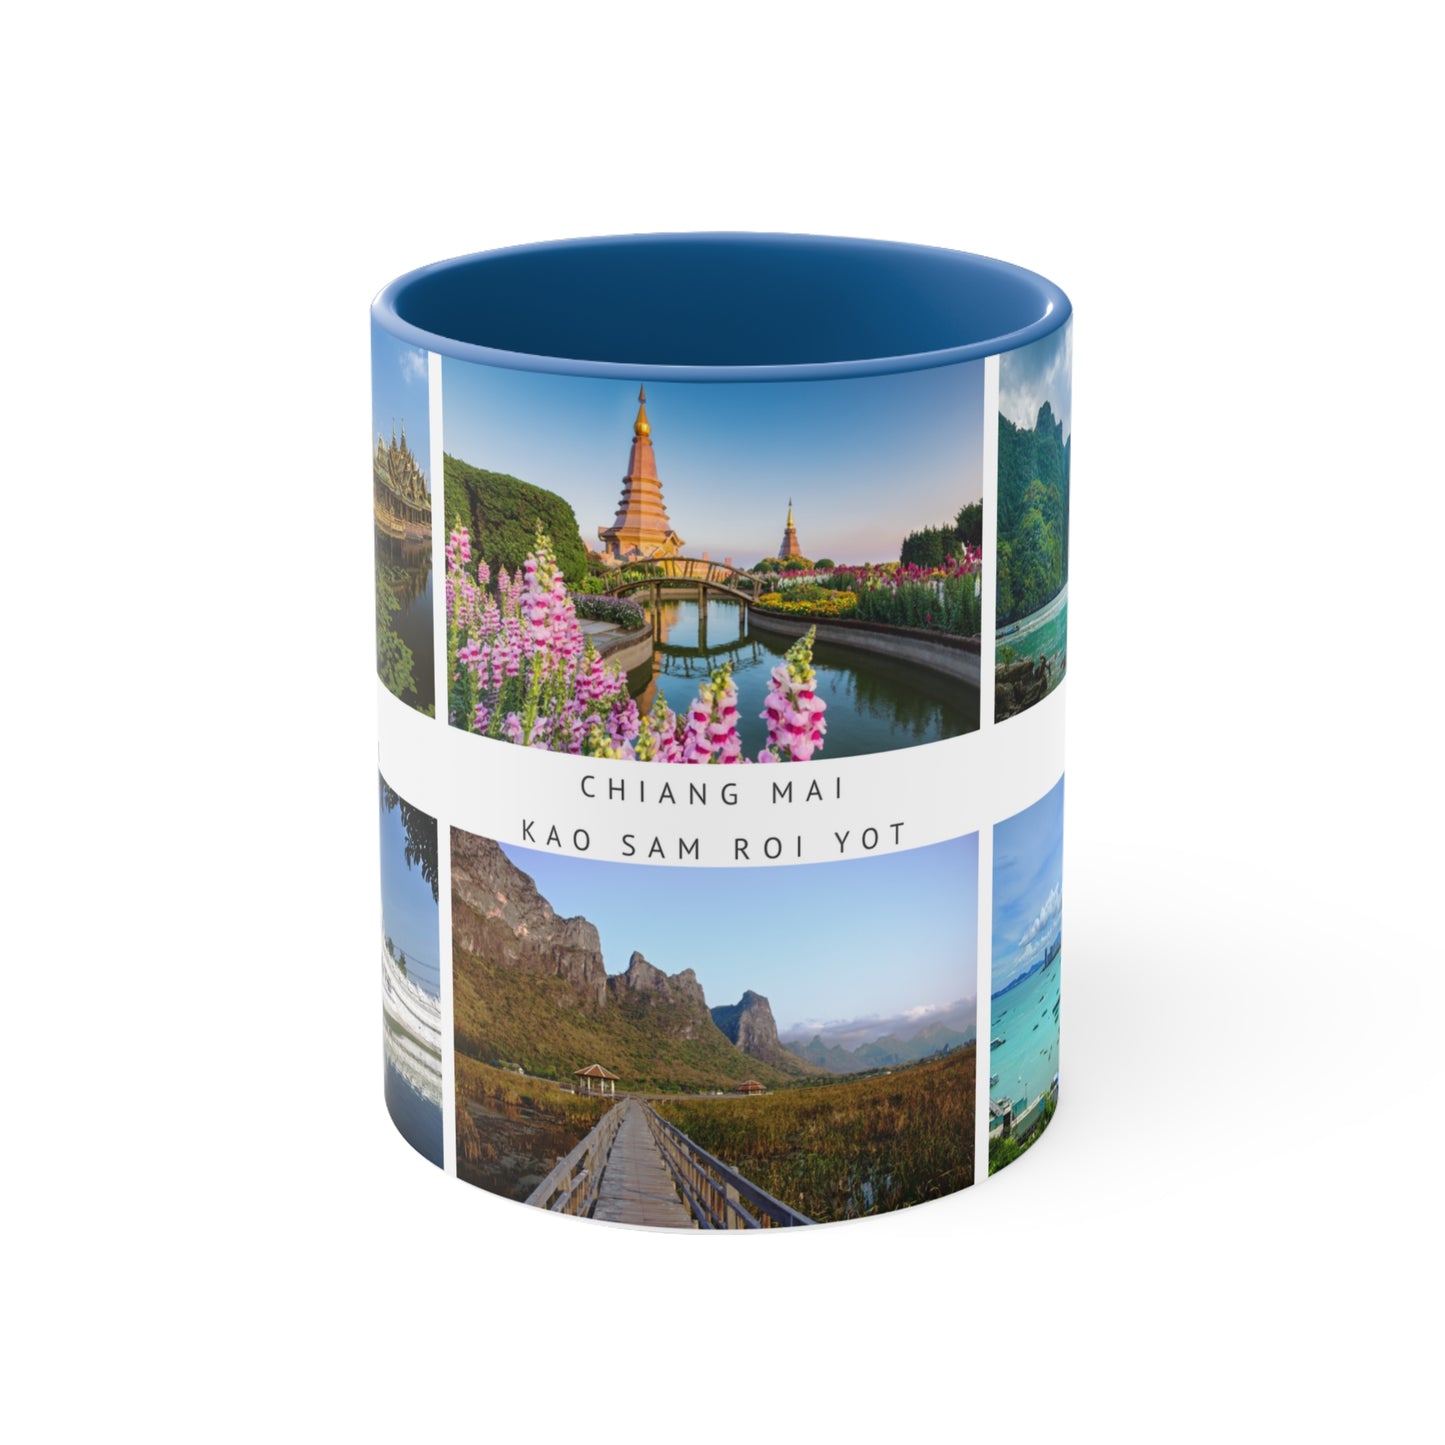 Amazing Thailand offers delicious cuisine, culture, beaches, festivals and the beautiful people calling it home. This Travel Accent Coffee Mug is a part of a Travel Series for you to choose from. 11oz. Great as a gift or get one to enjoy yourself.